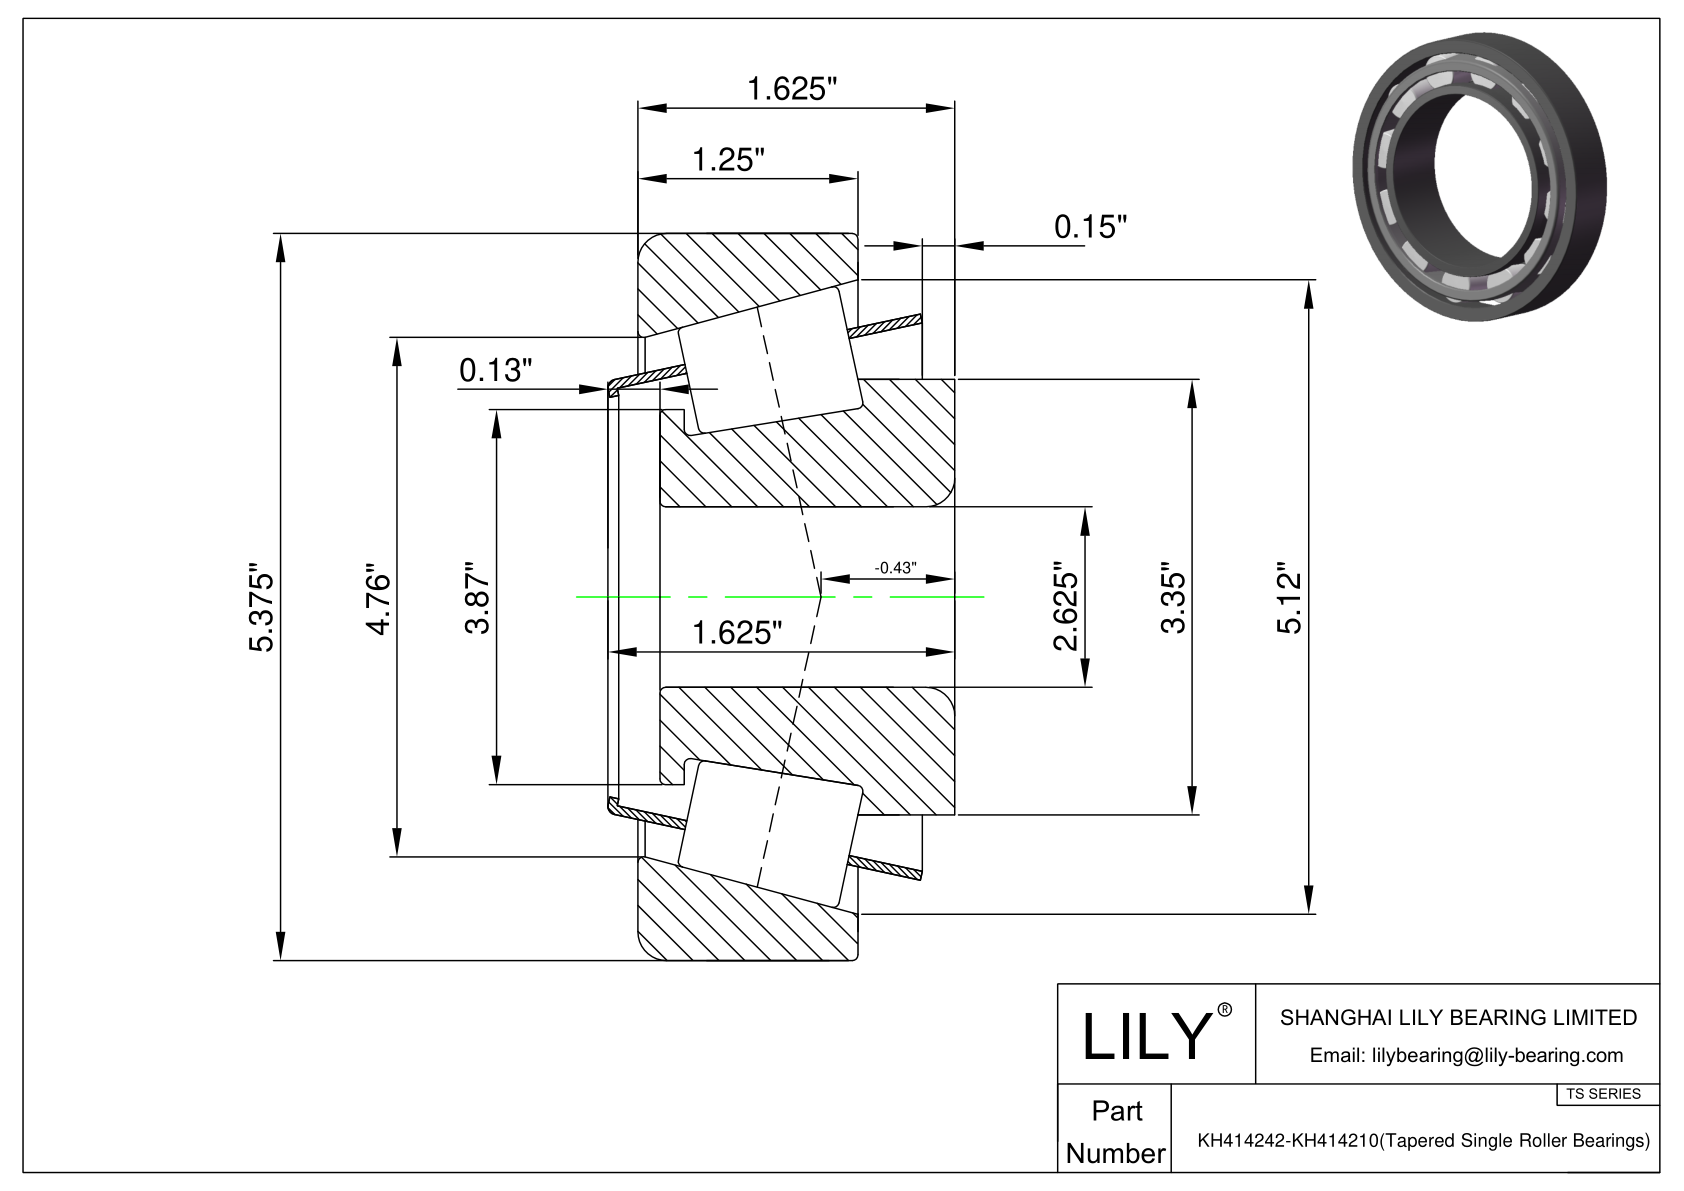 KH414242-KH414210 TS (Tapered Single Roller Bearings) (Imperial) cad drawing